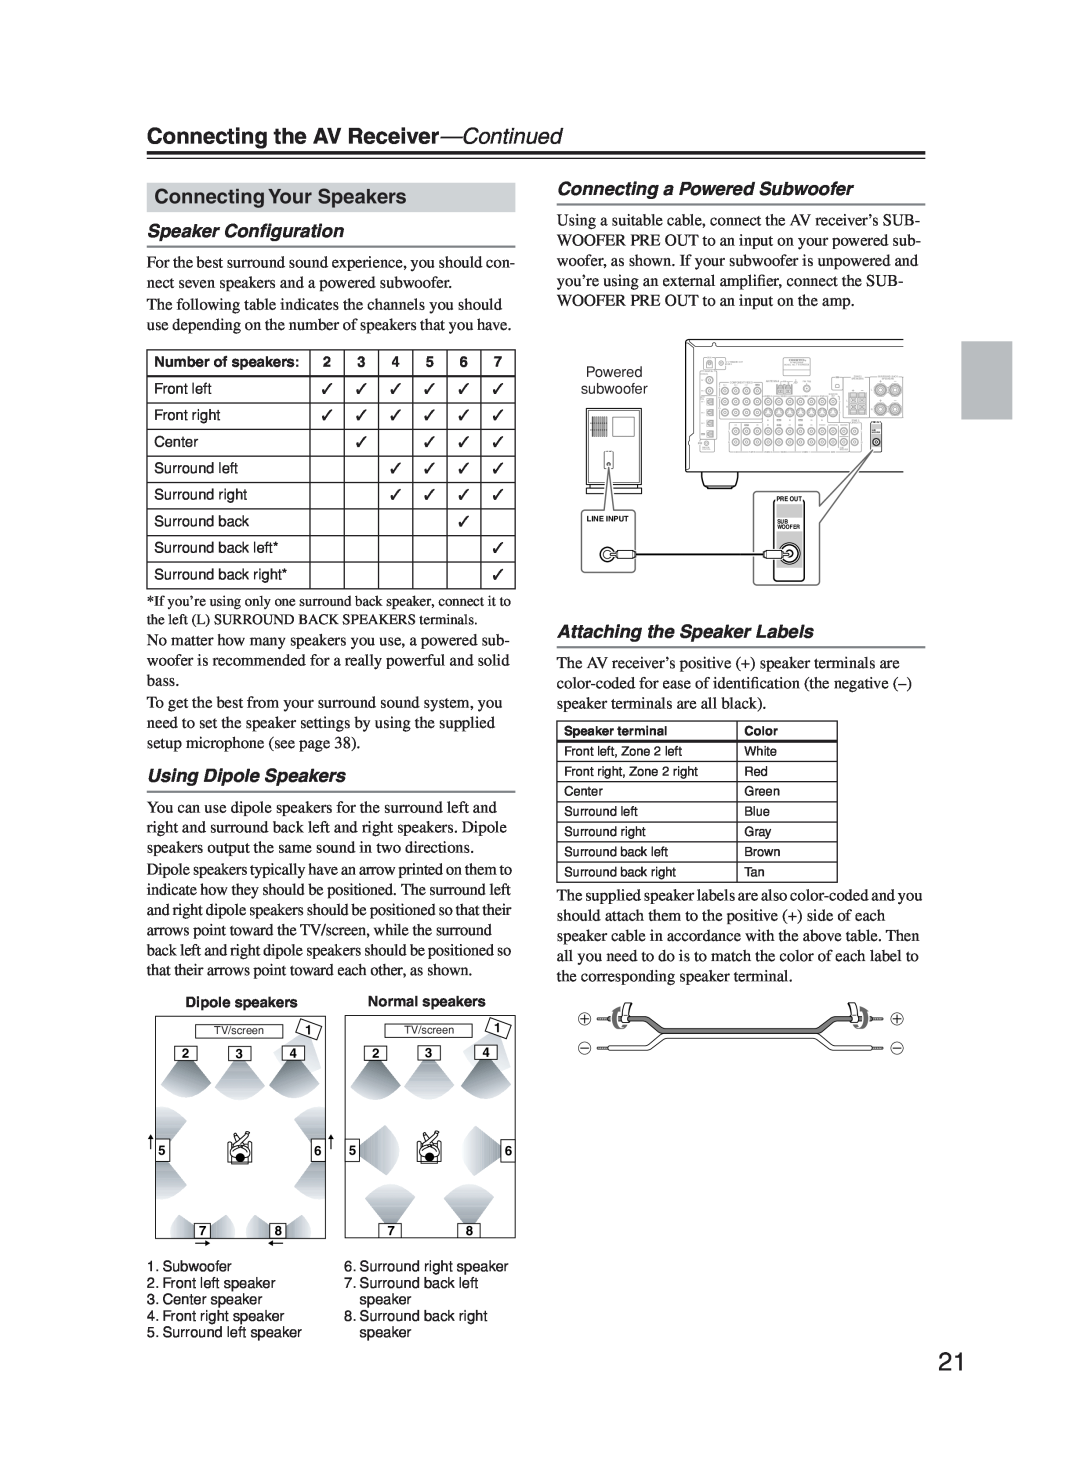 Onkyo TX-SR603X instruction manual Connecting the AV Receiver-Continued, Connecting Your Speakers, Speaker Conﬁguration 